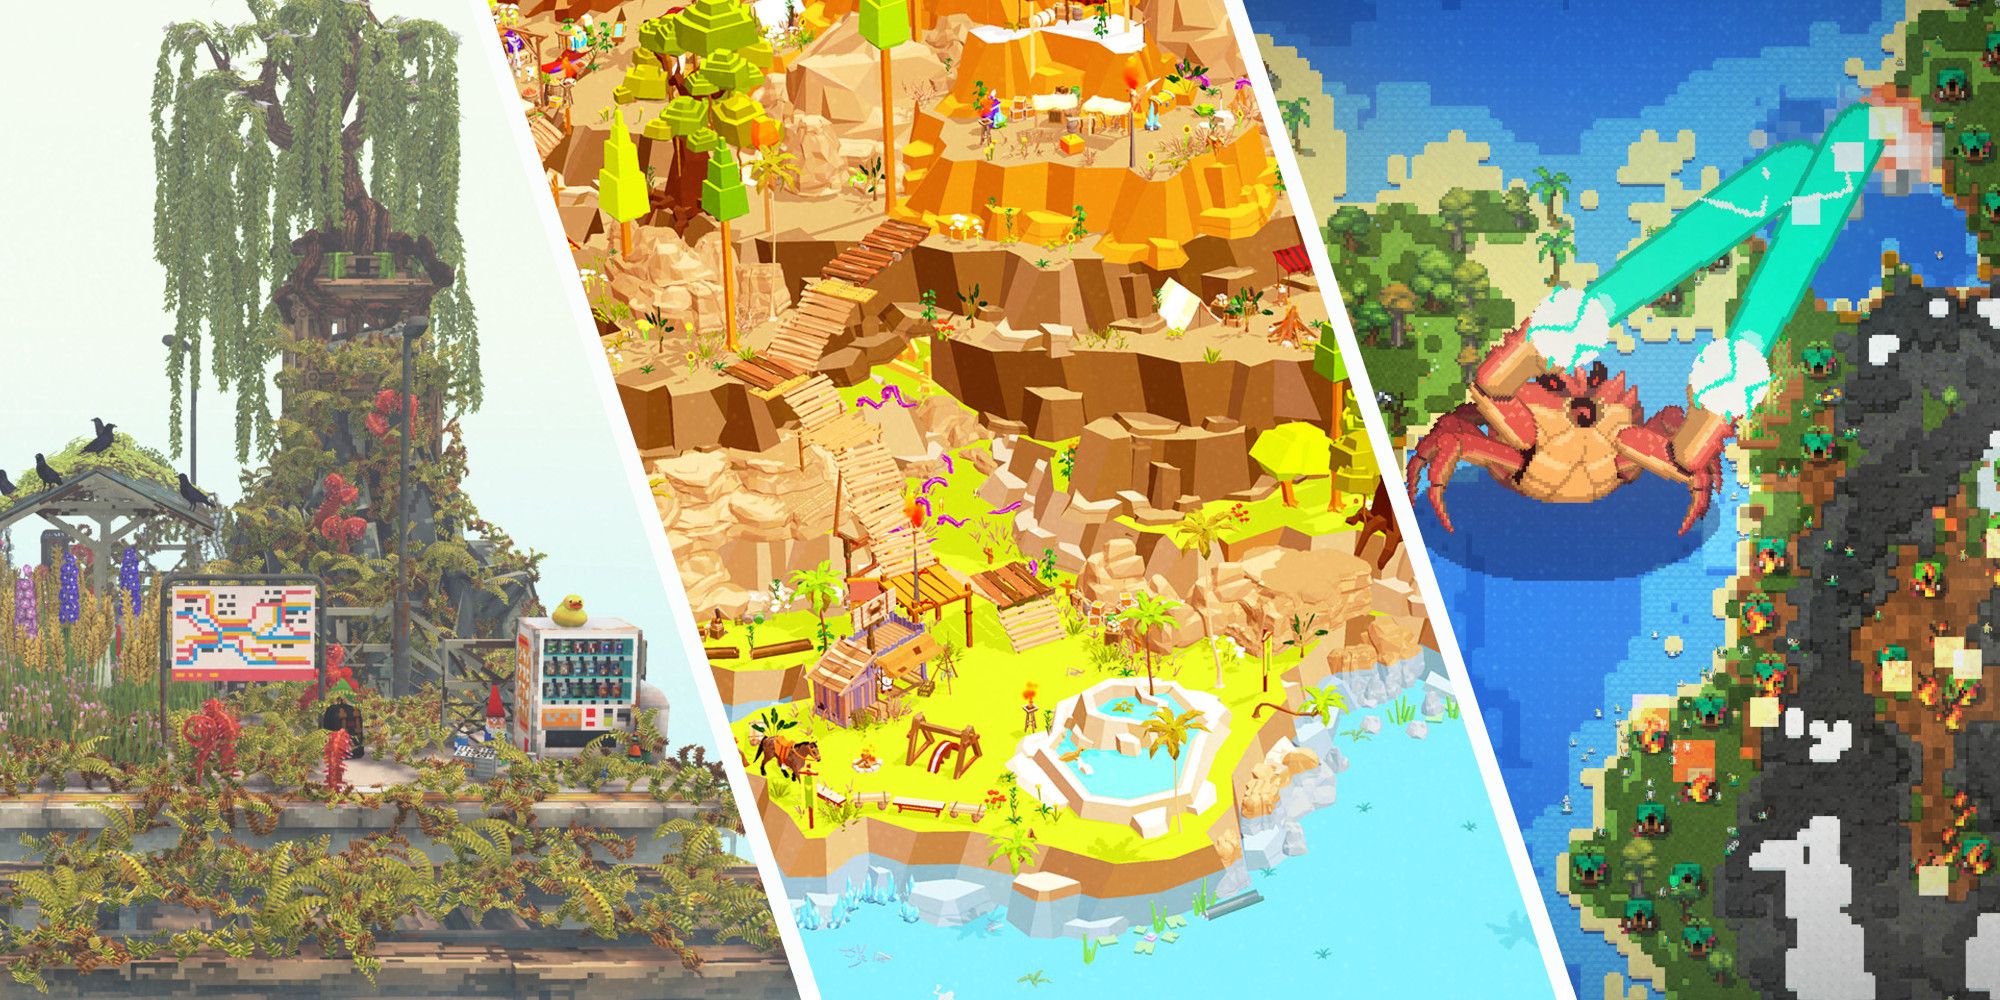 Three images from different sandbox games: Cloud Gardens, Super Build, and WorldBox - God Simulator